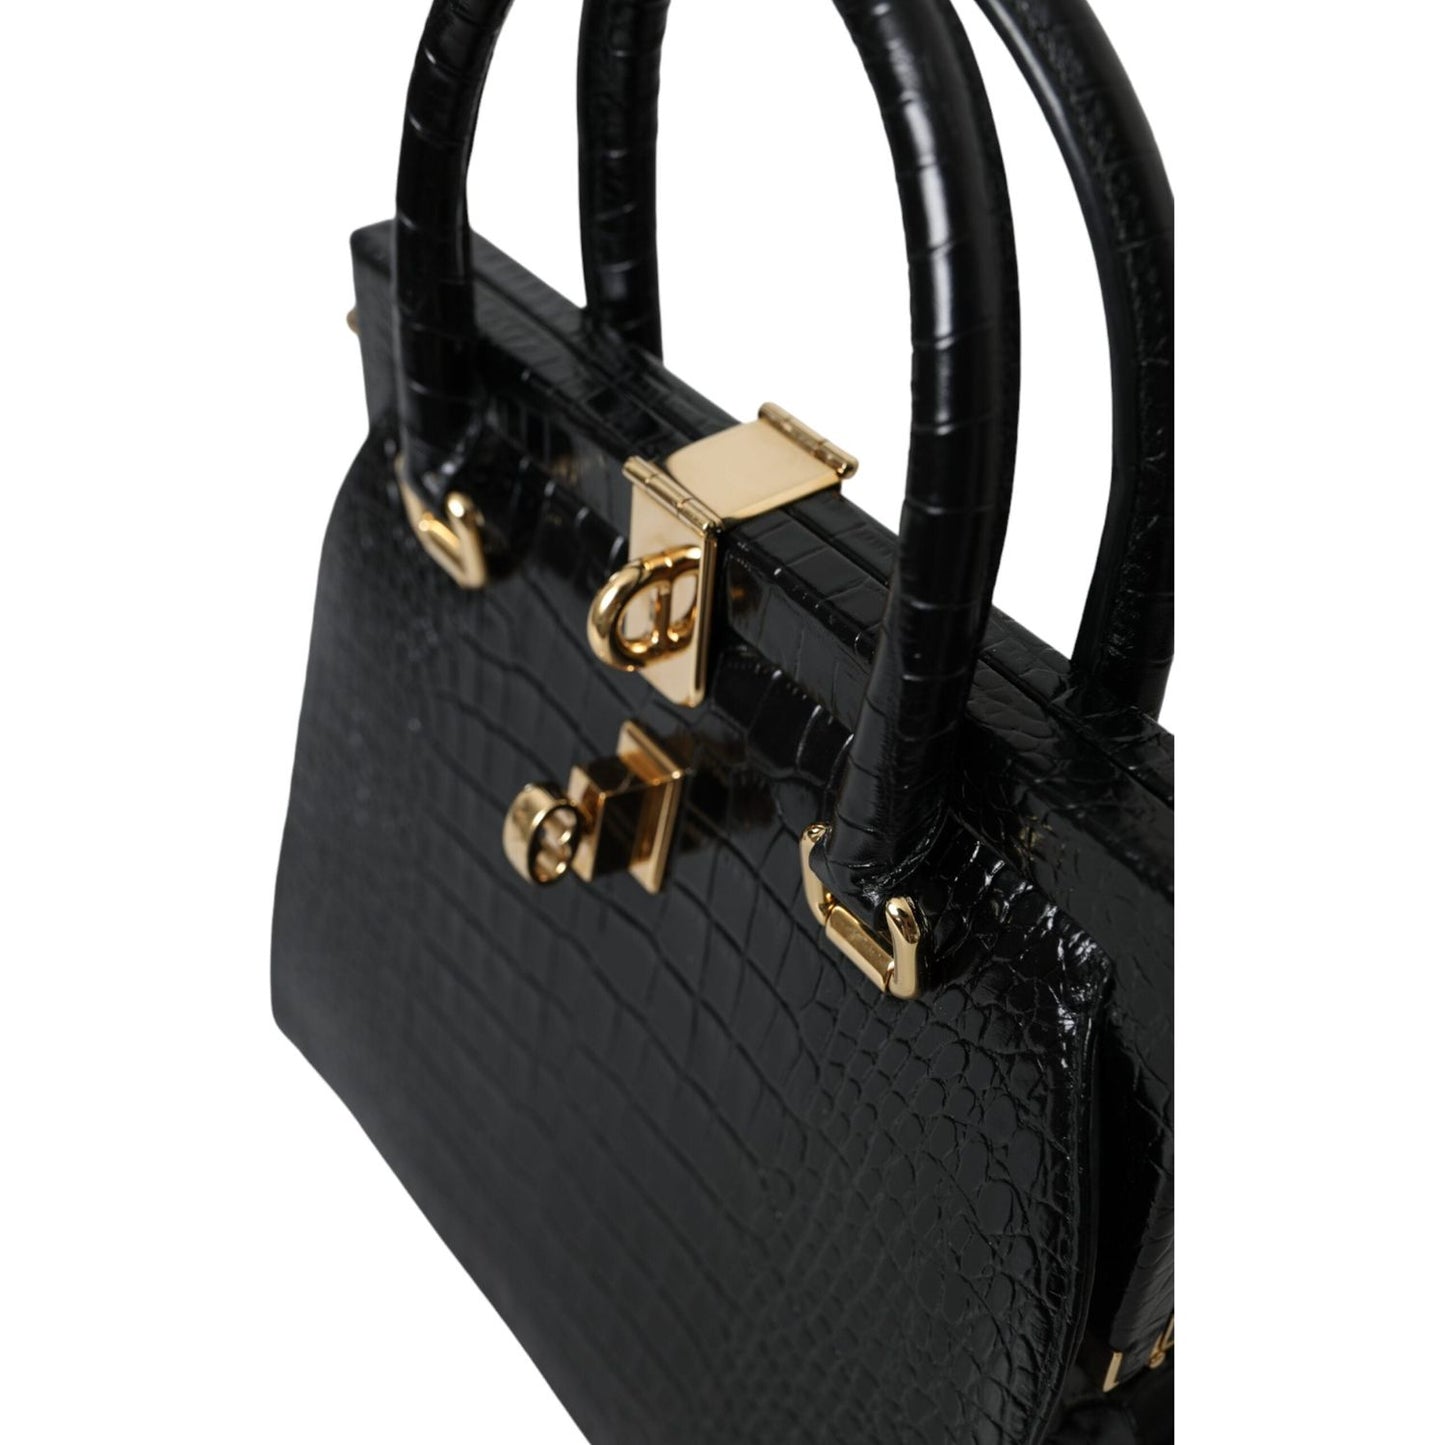 Black Exotic Leather Top Handle Tote Women Bag